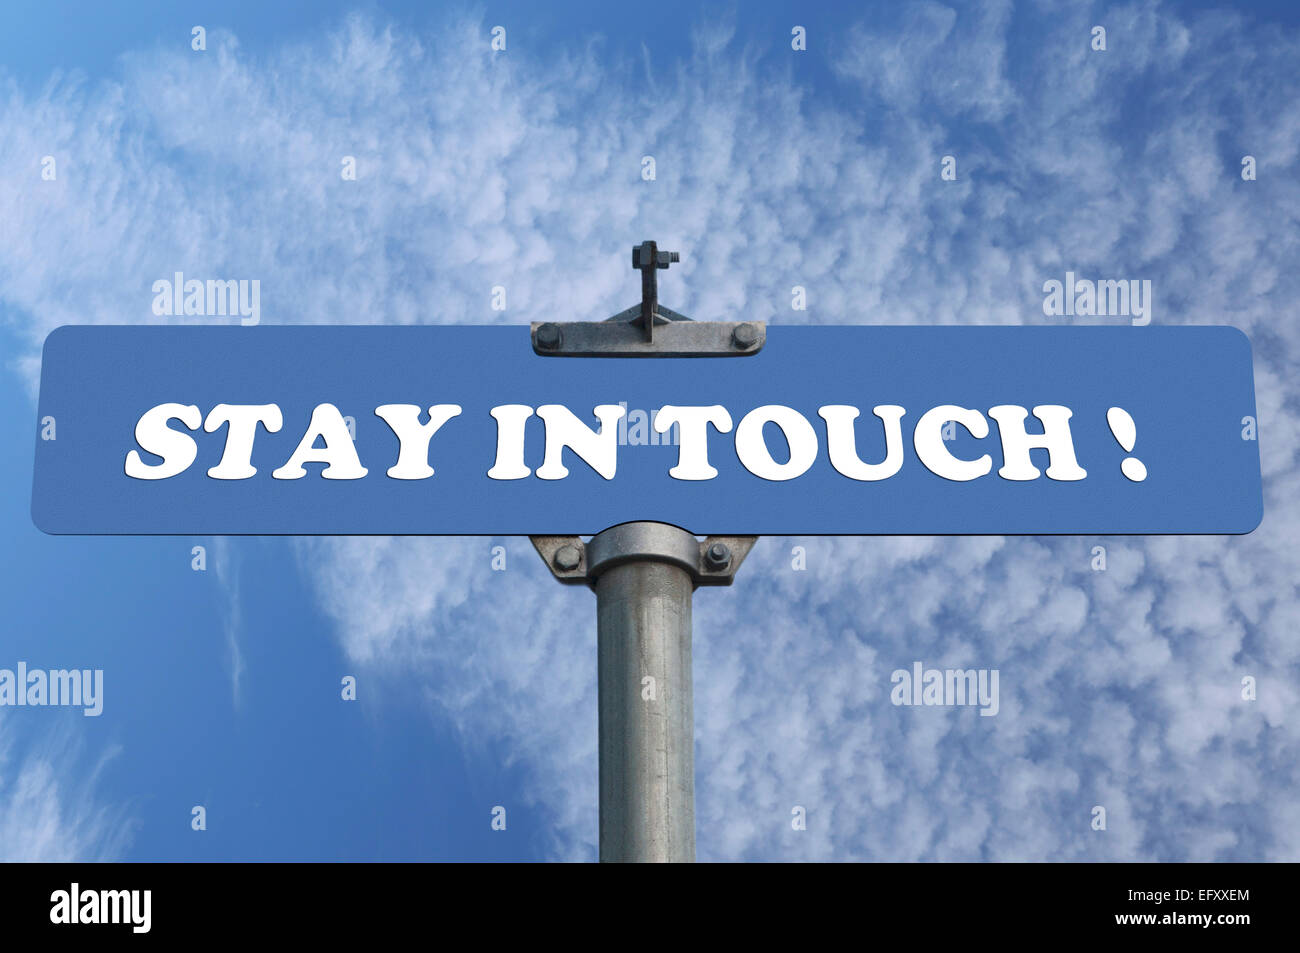 Stay in touch road sign Stock Photo